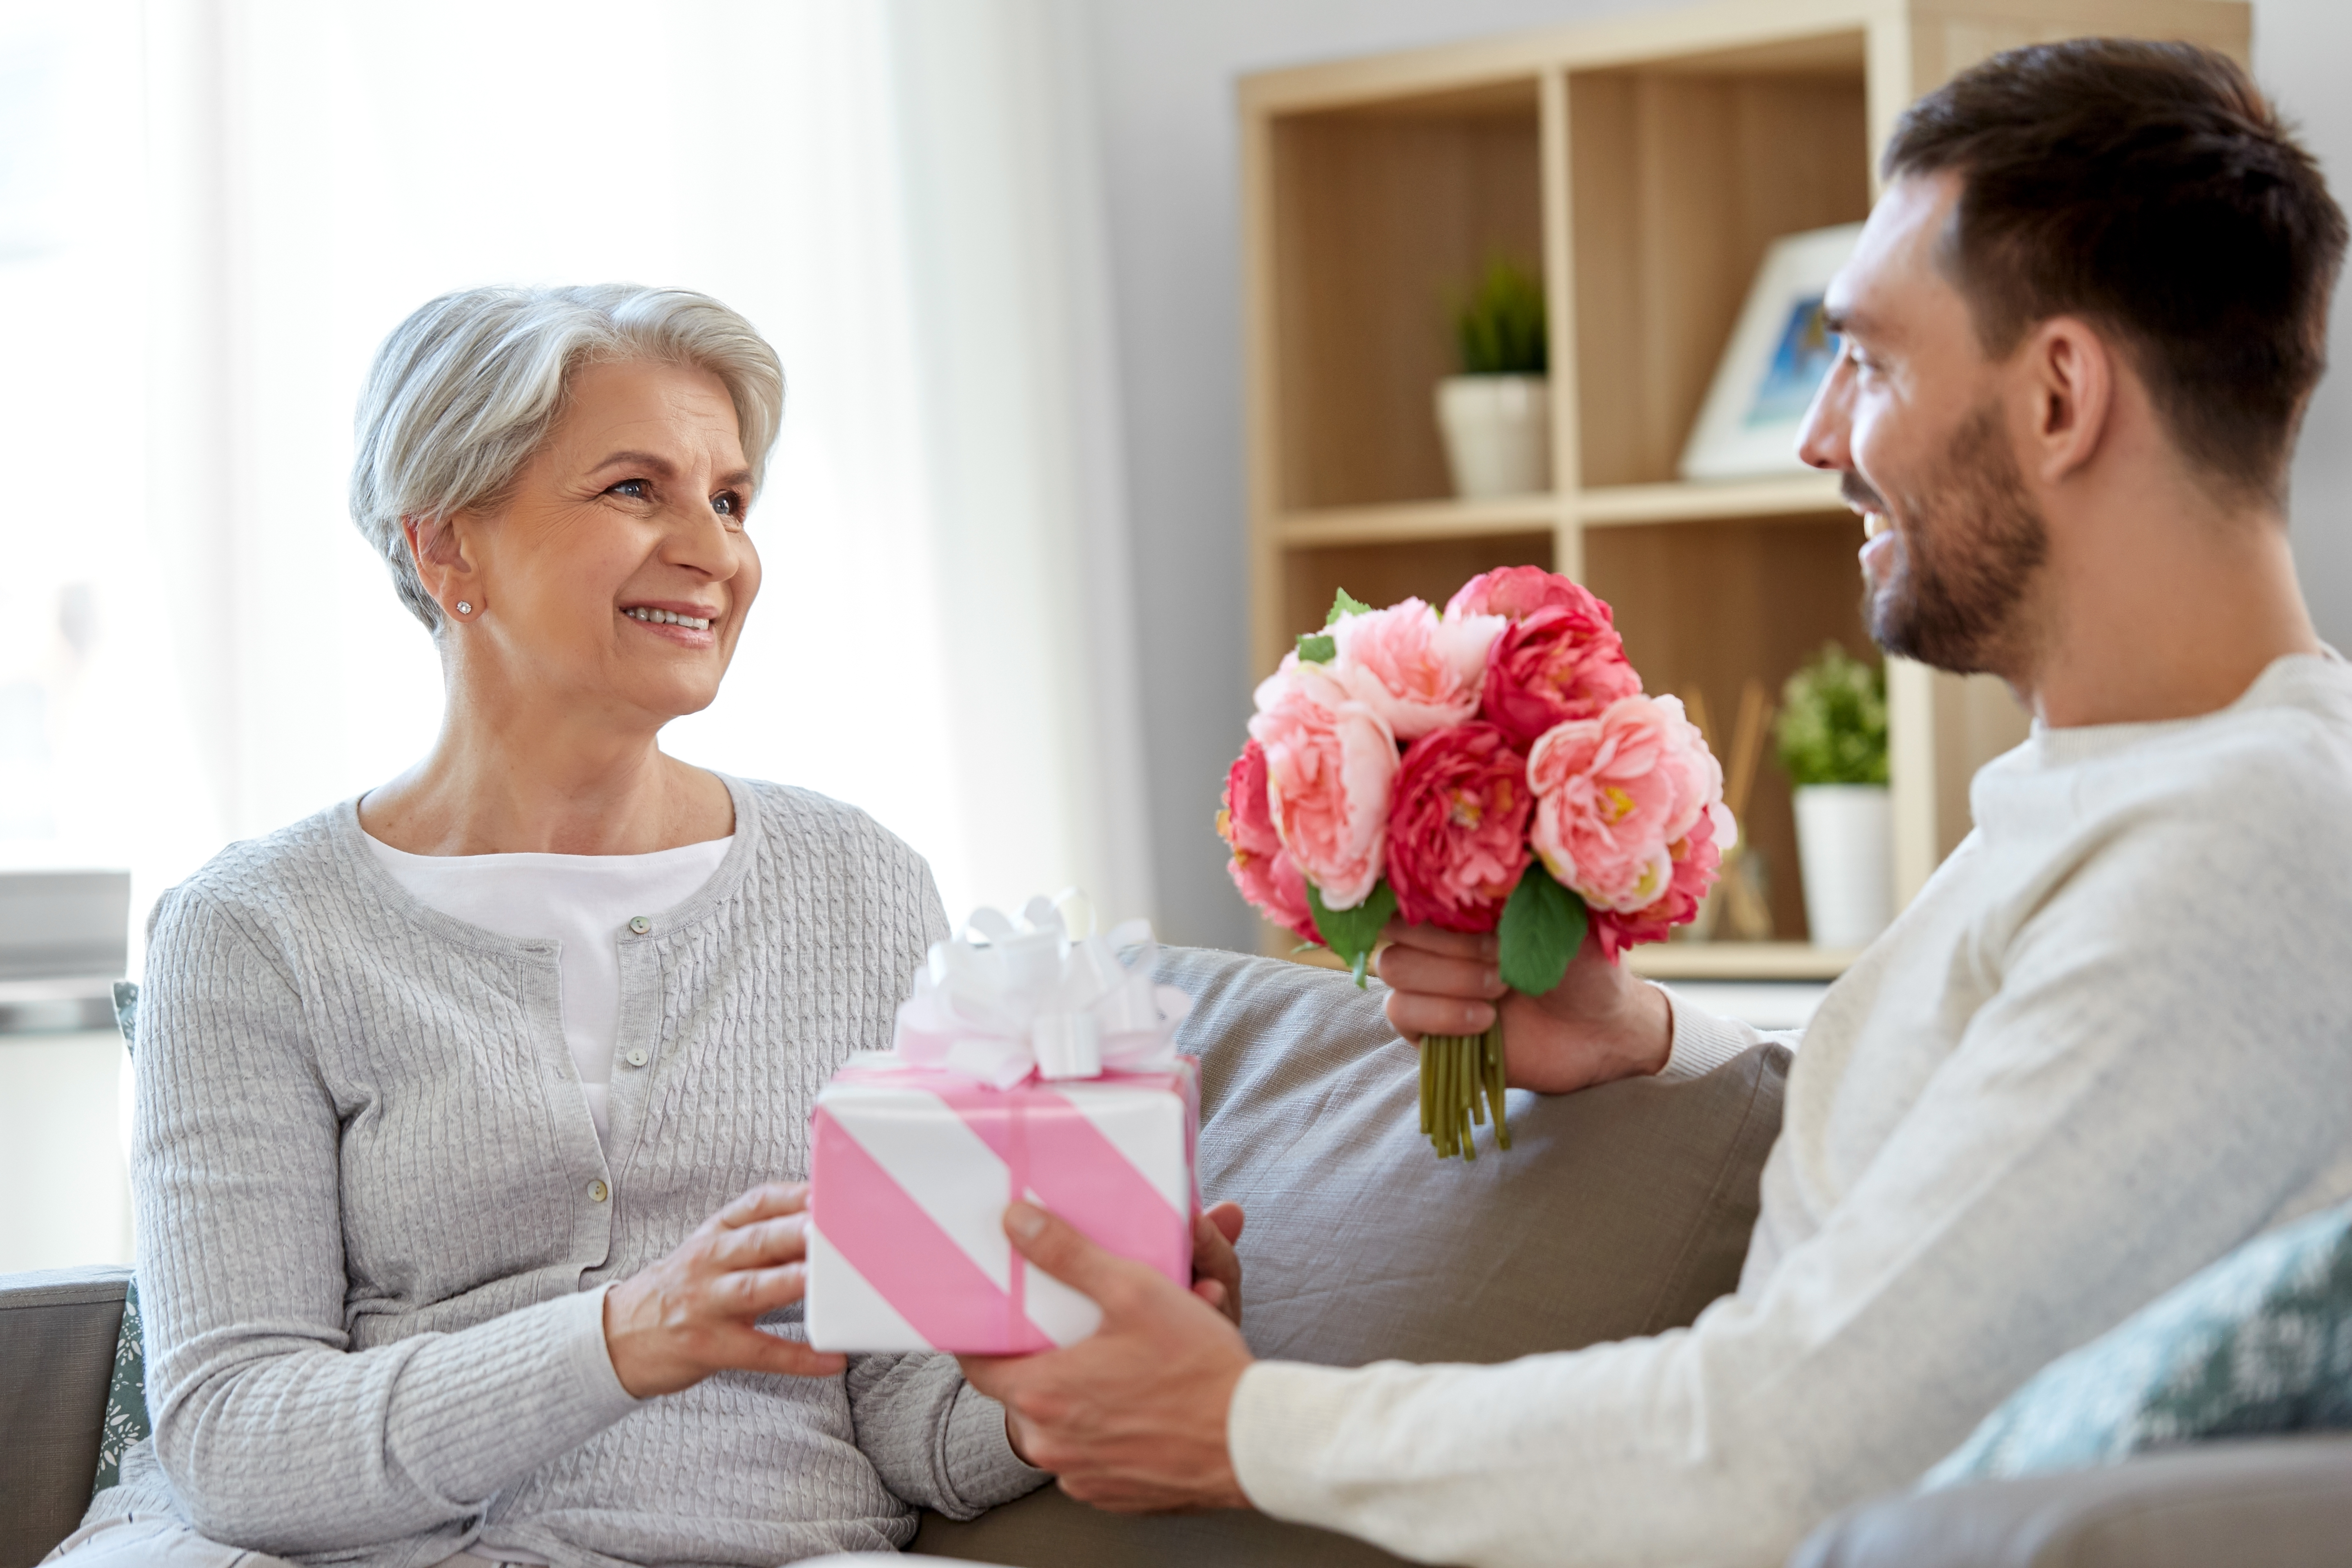 A man giving a gift to his mother | Source: Shutterstock